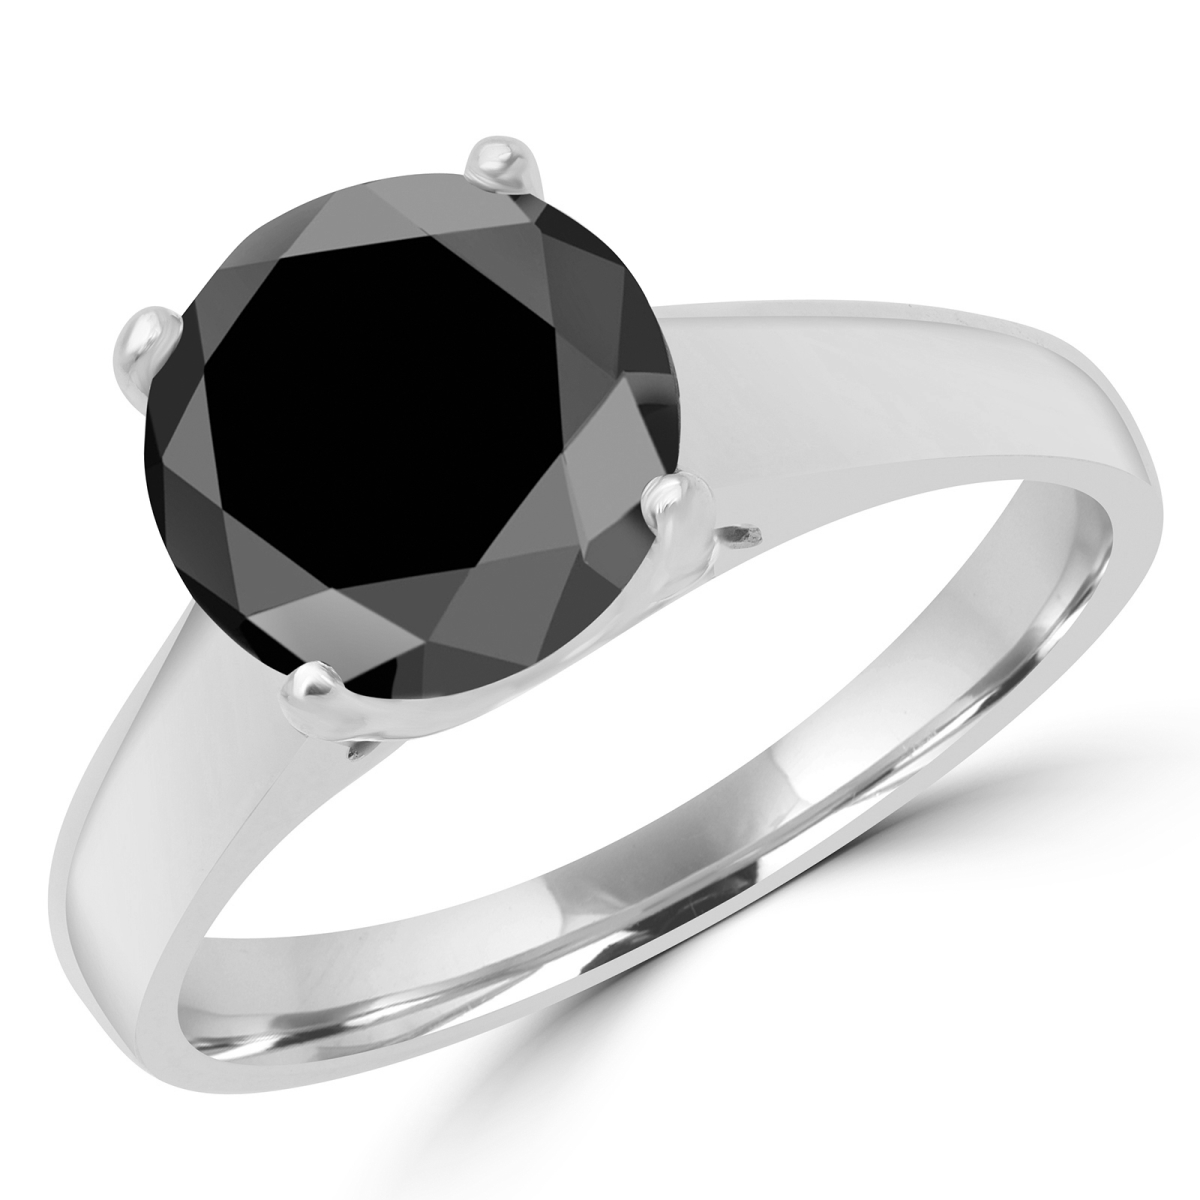 Picture of Majesty Diamonds MD170224-8 1 0.5 CT Round Black Diamond Solitaire Engagement Ring in 14K White Gold - Size 8